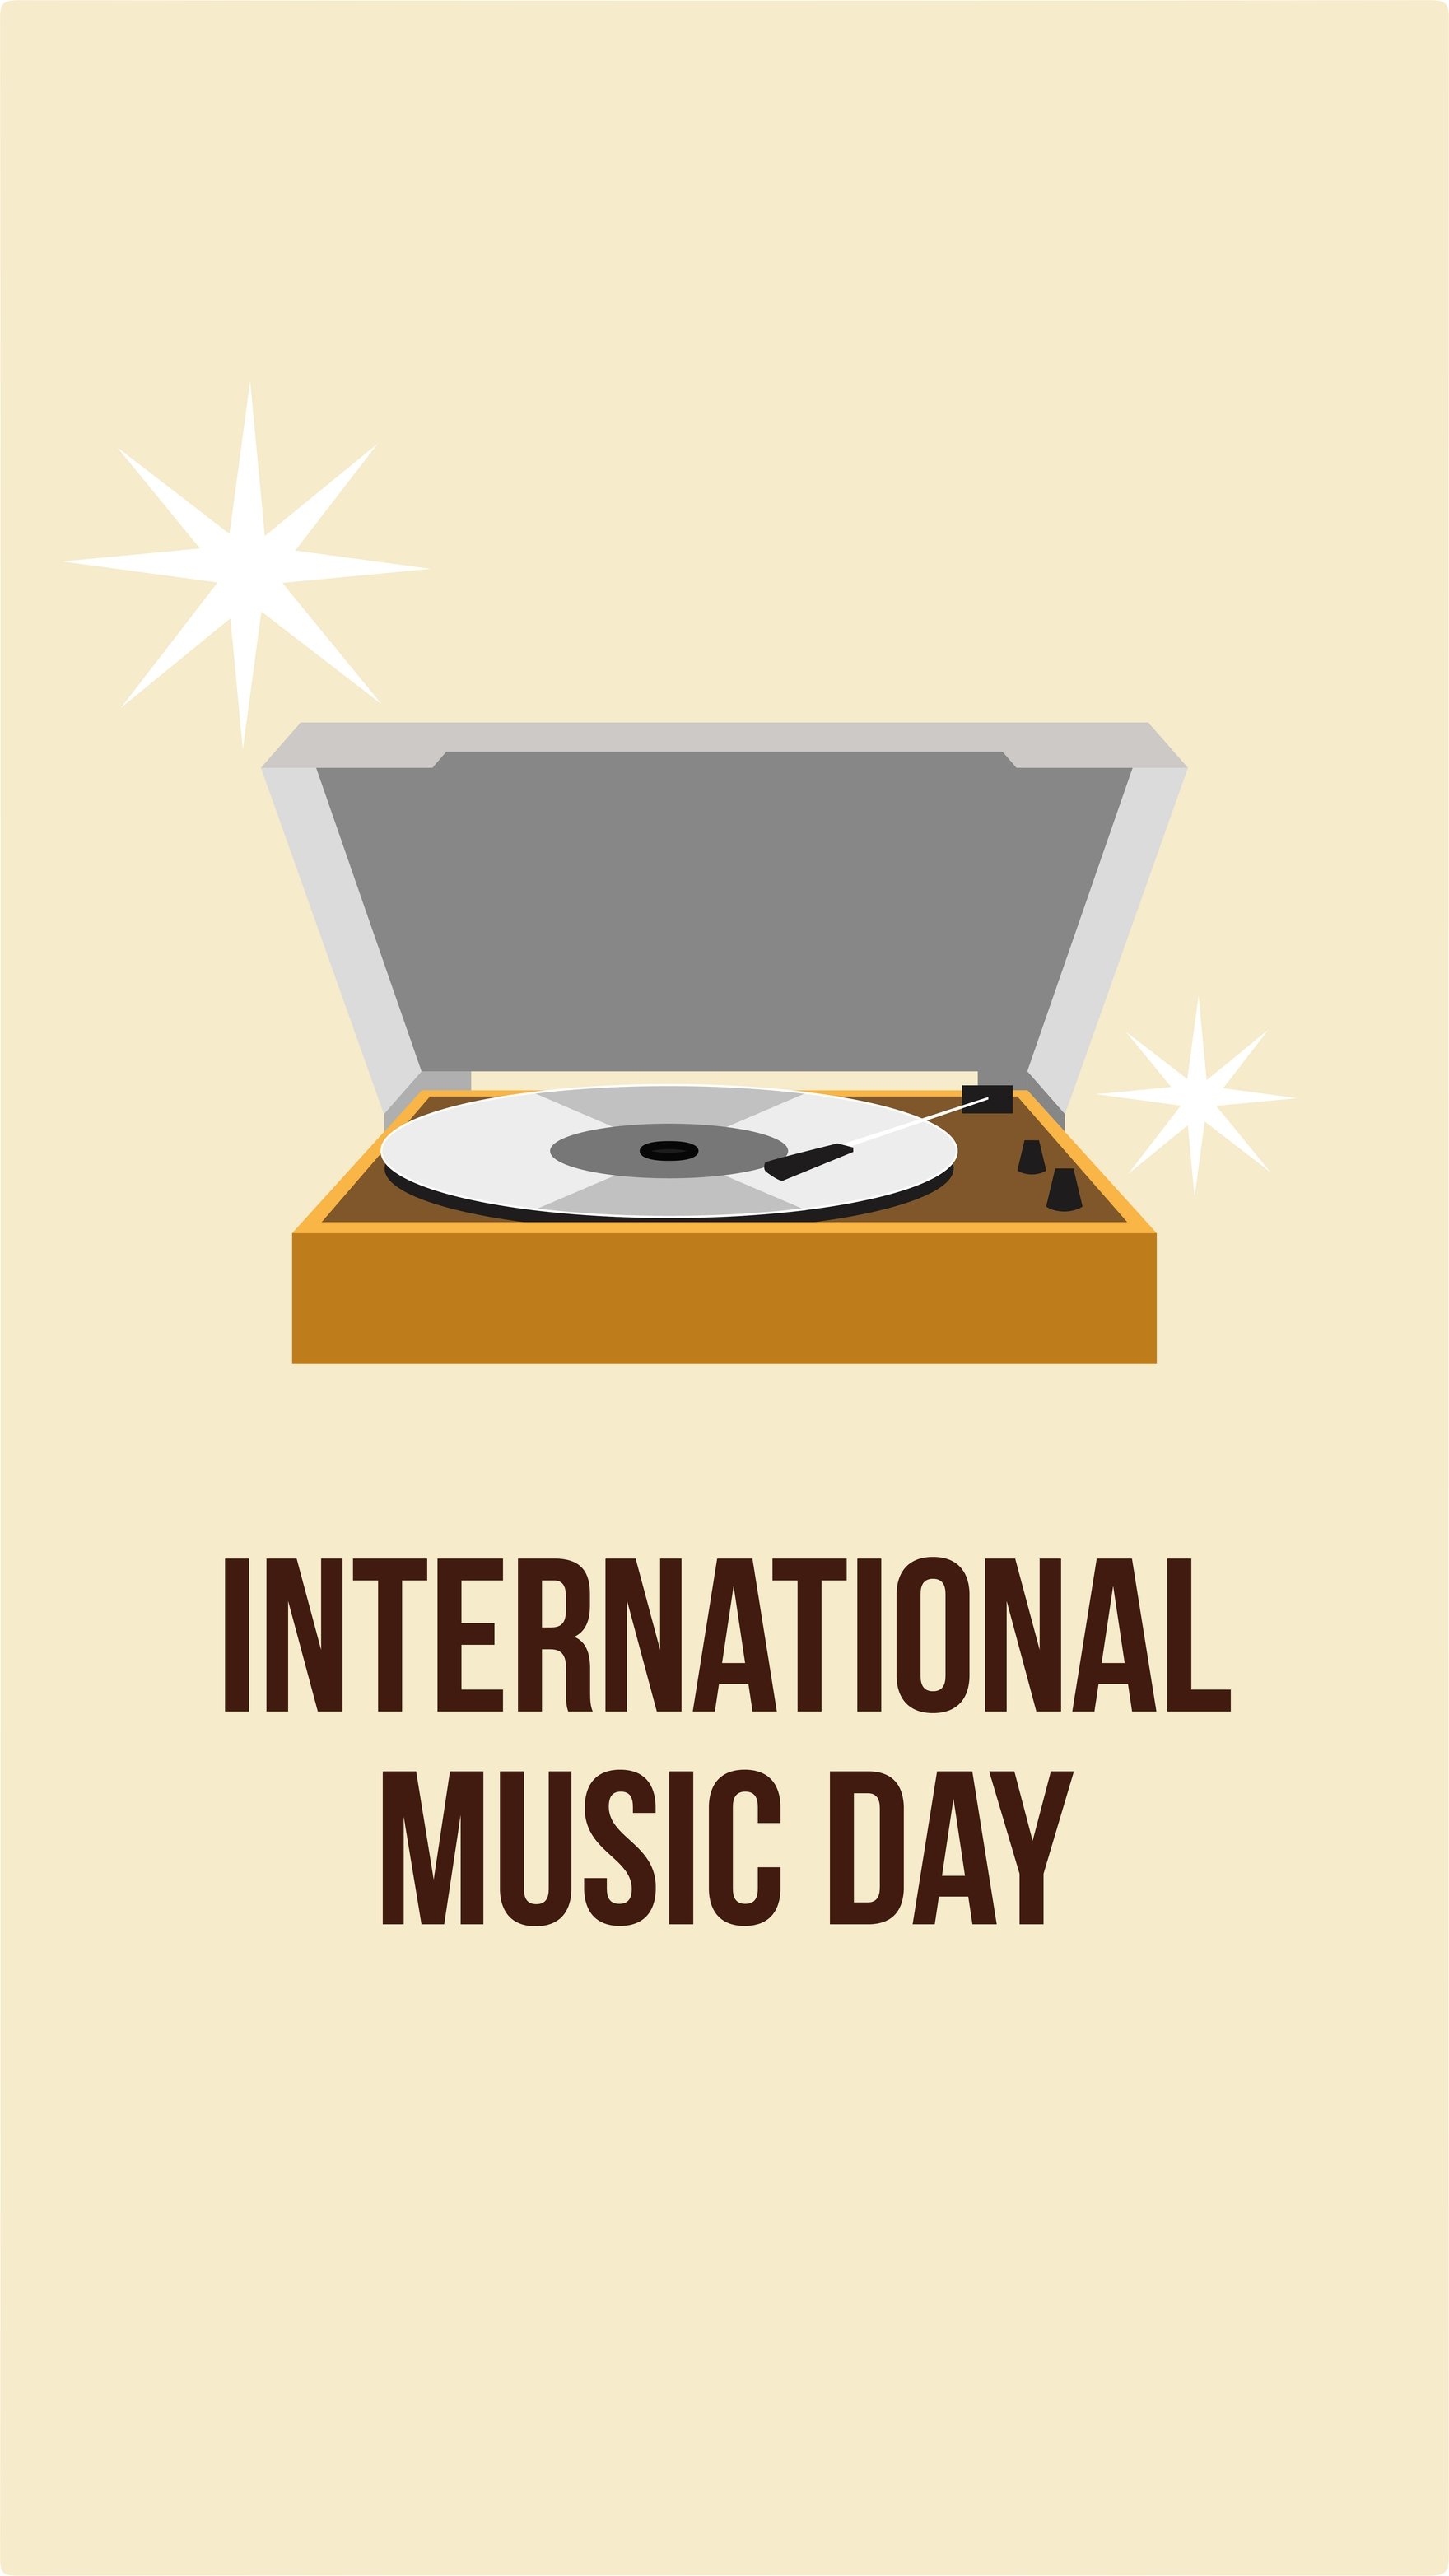 Free International Music Day iPhone Background in PDF, Illustrator, PSD, EPS, SVG, JPG, PNG